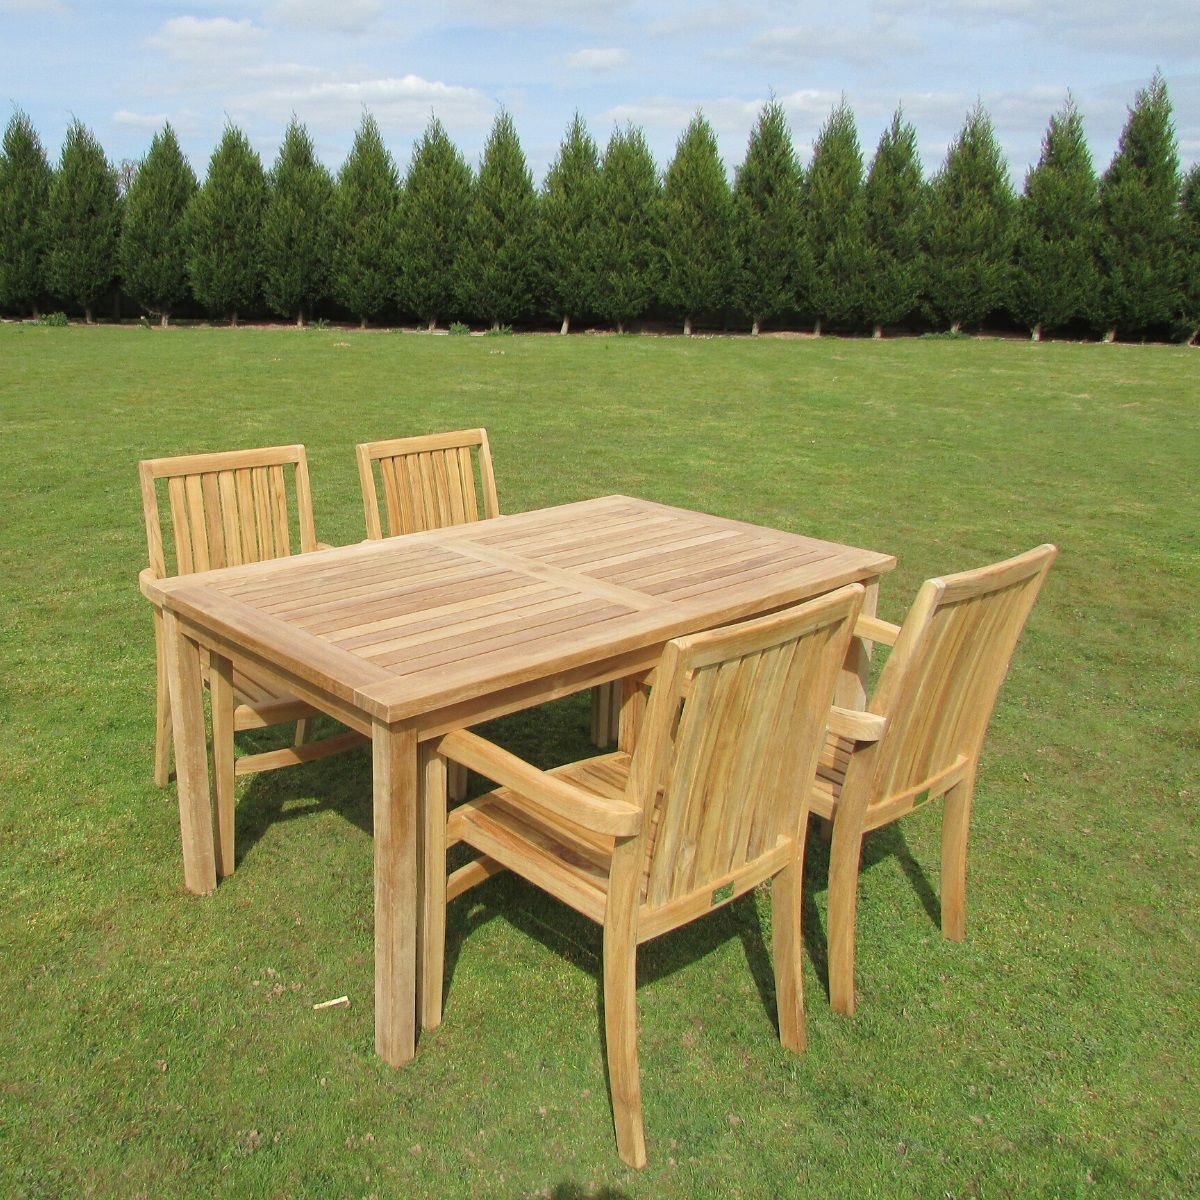 Teak Rectangular Table And 4 Chairs Set | Woodberry Inside Teak Outdoor Square Dining Sets (View 14 of 15)